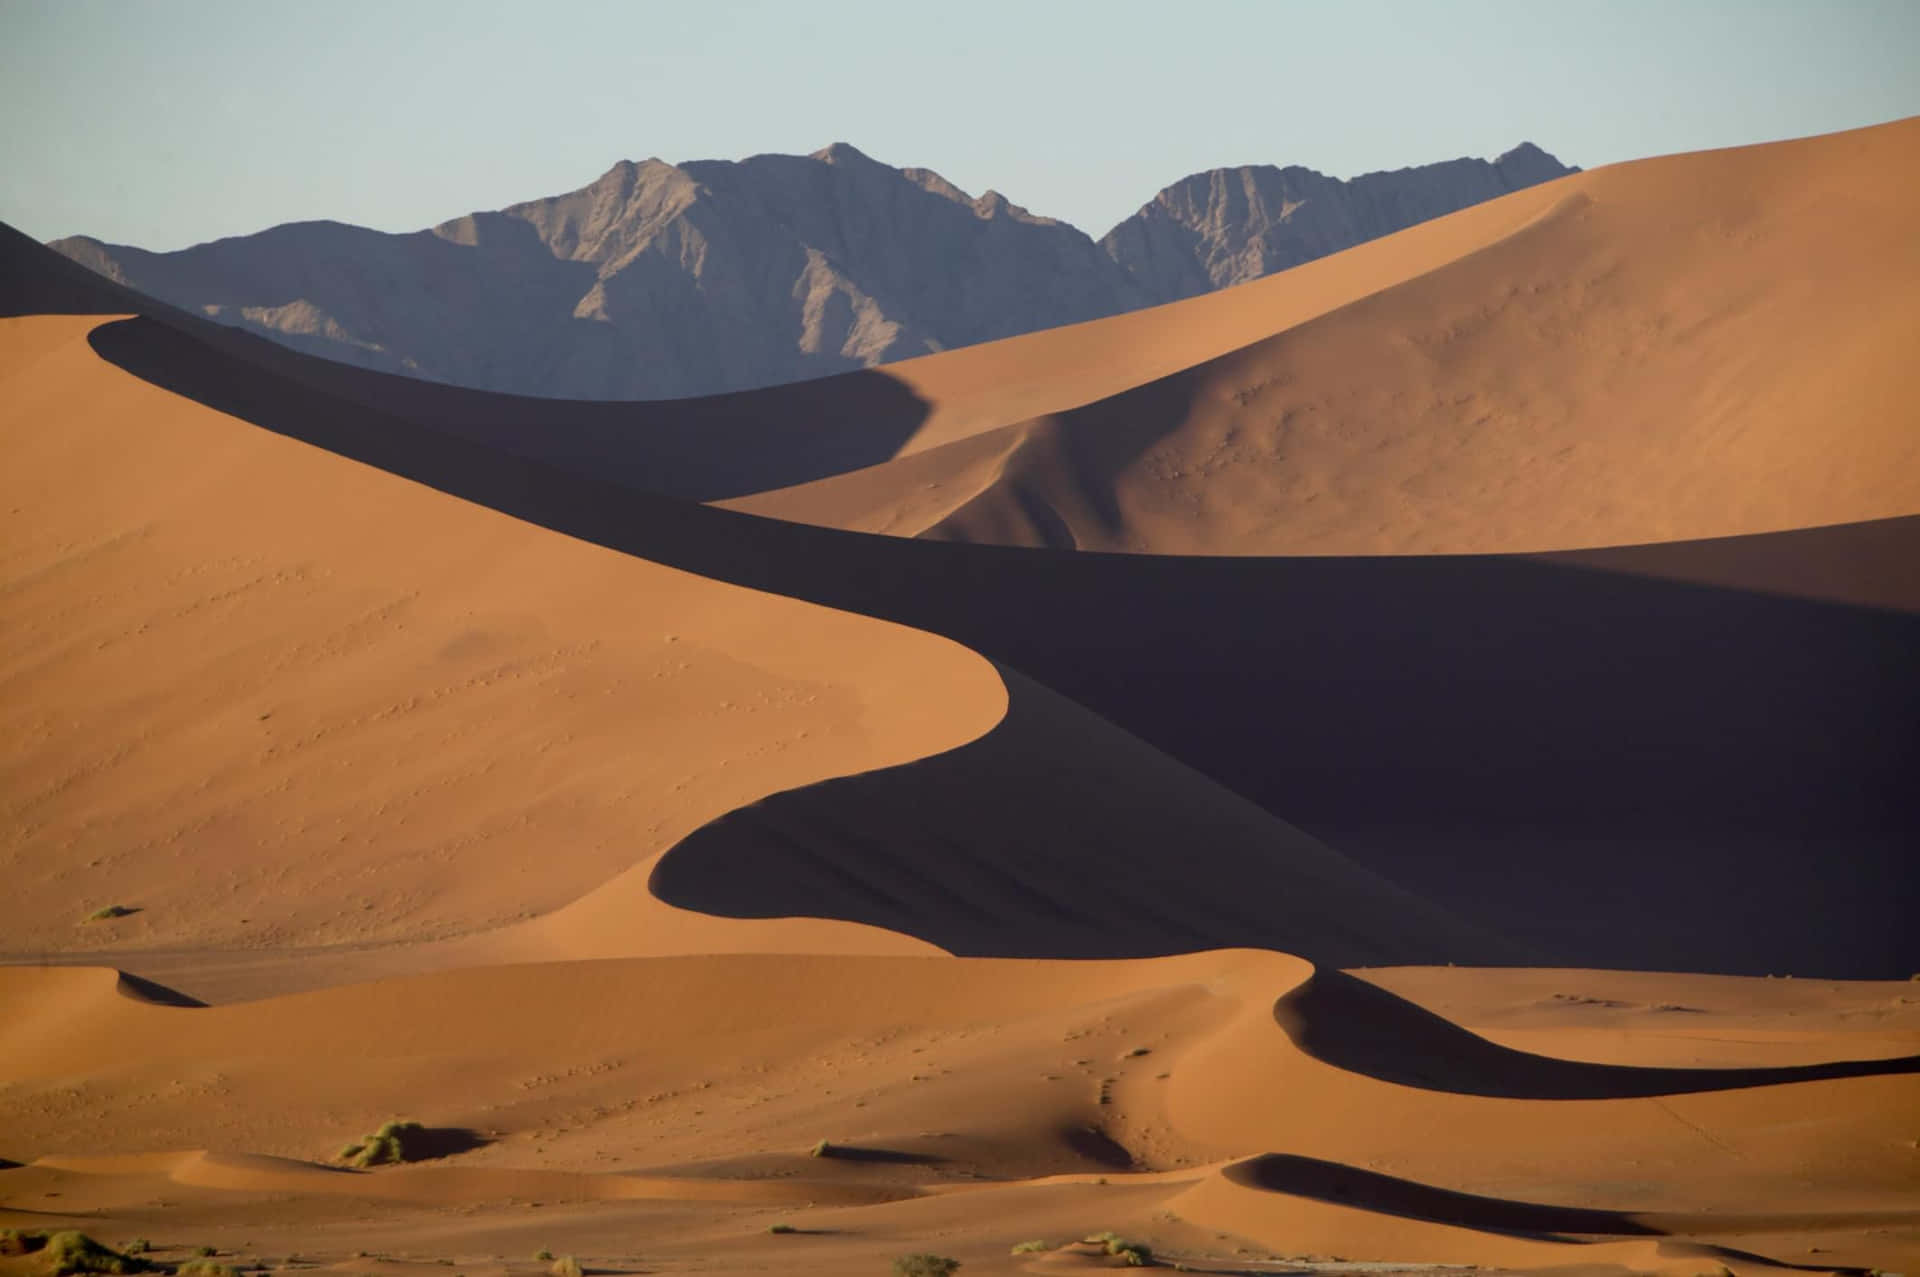 A Desert Landscape With Sand Dunes And Mountains